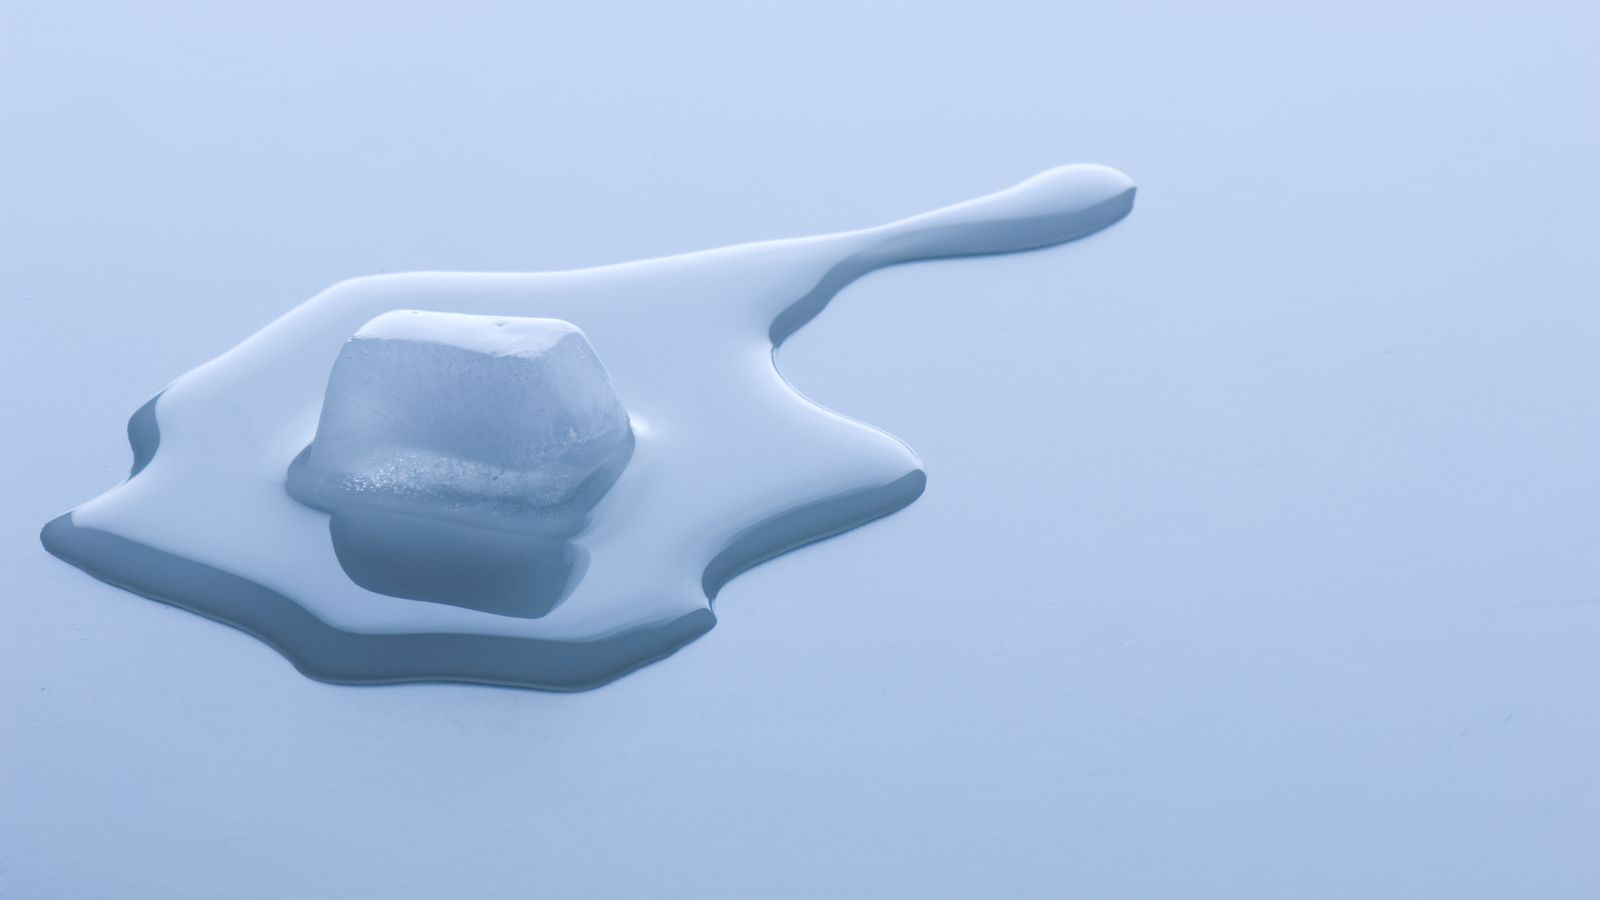 a melting ice cube on a white surface